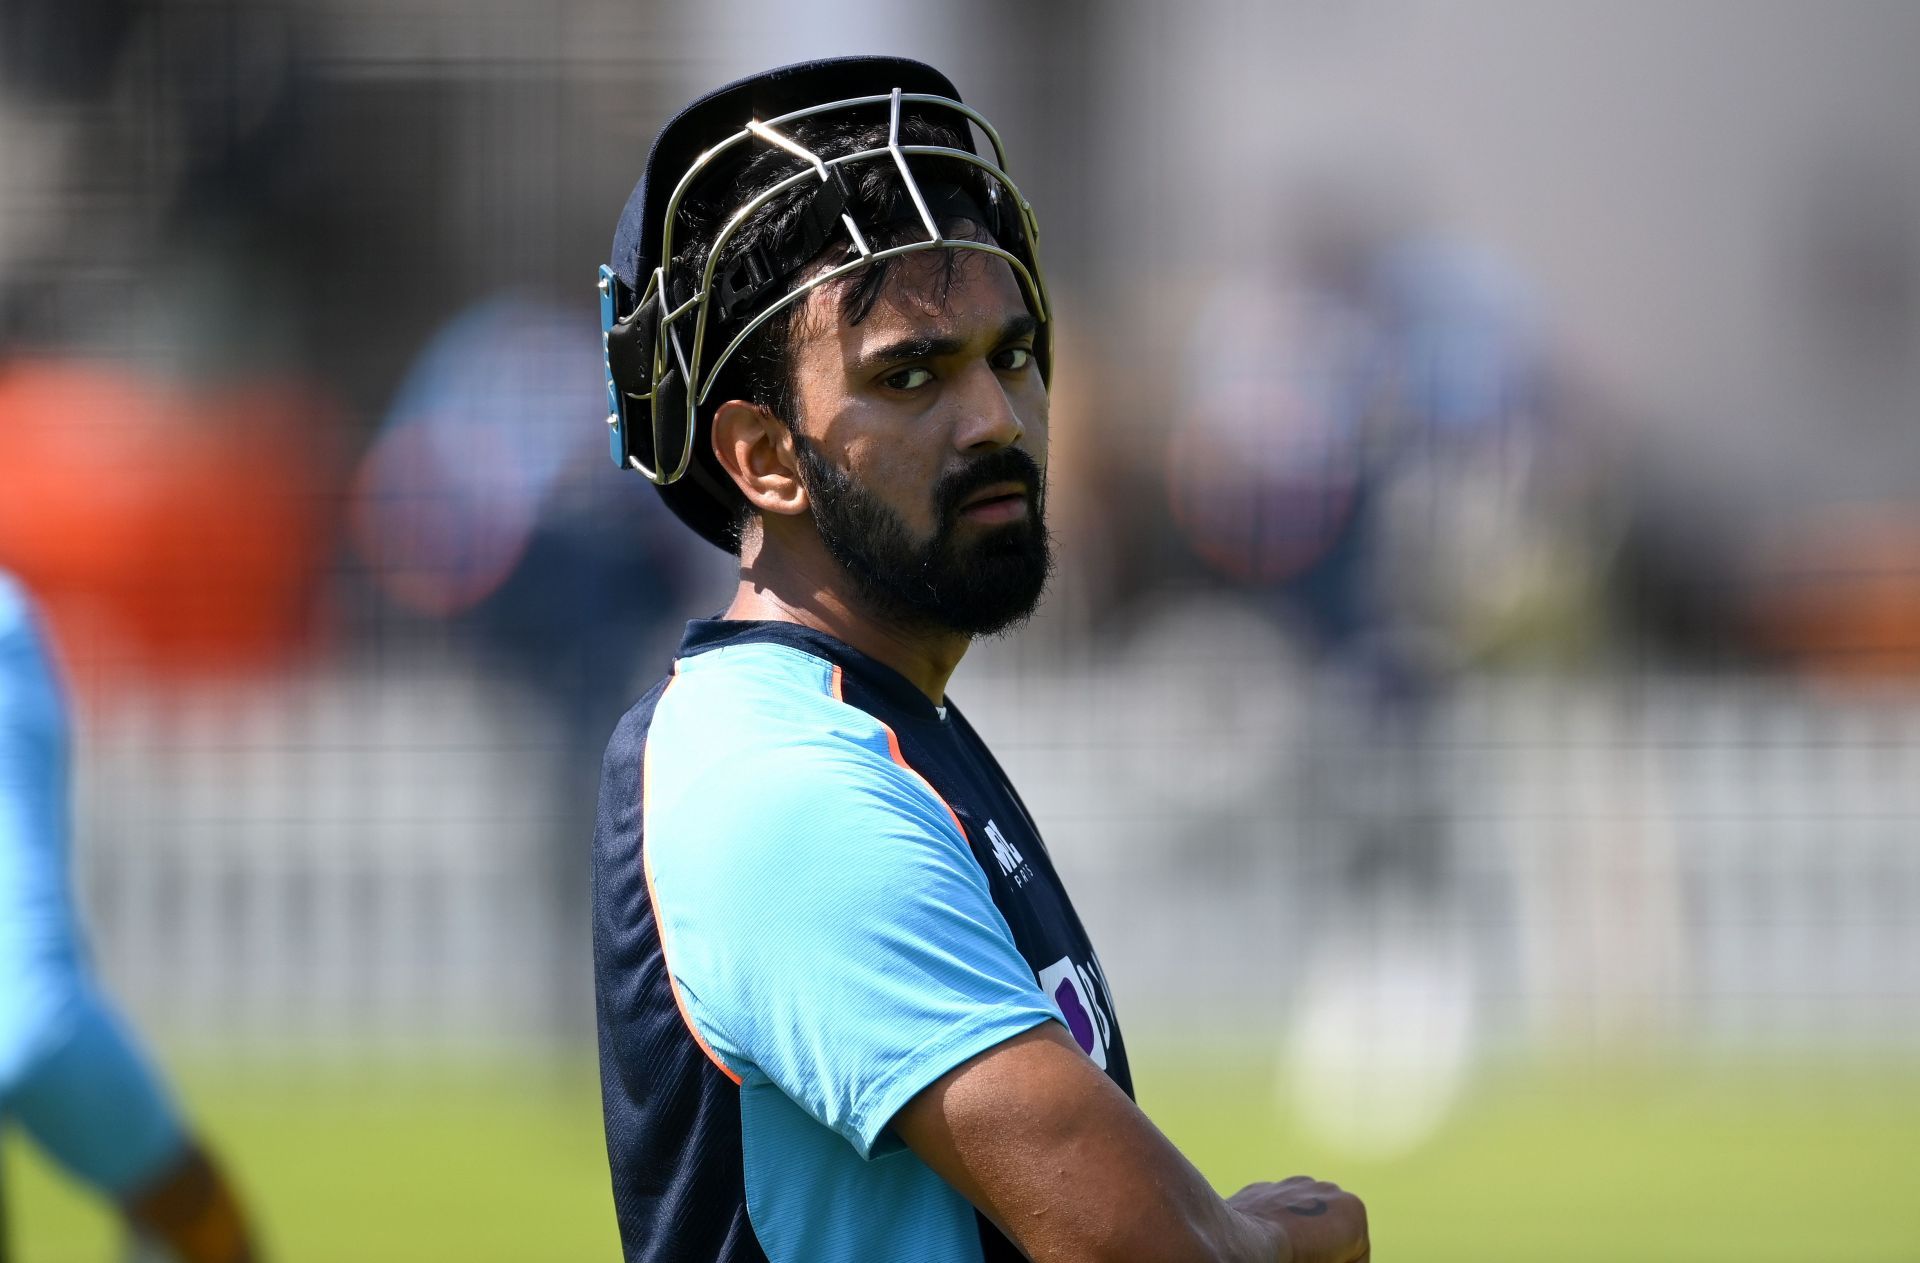 More bad news for KL Rahul as he is likely to miss the T20I series against WI